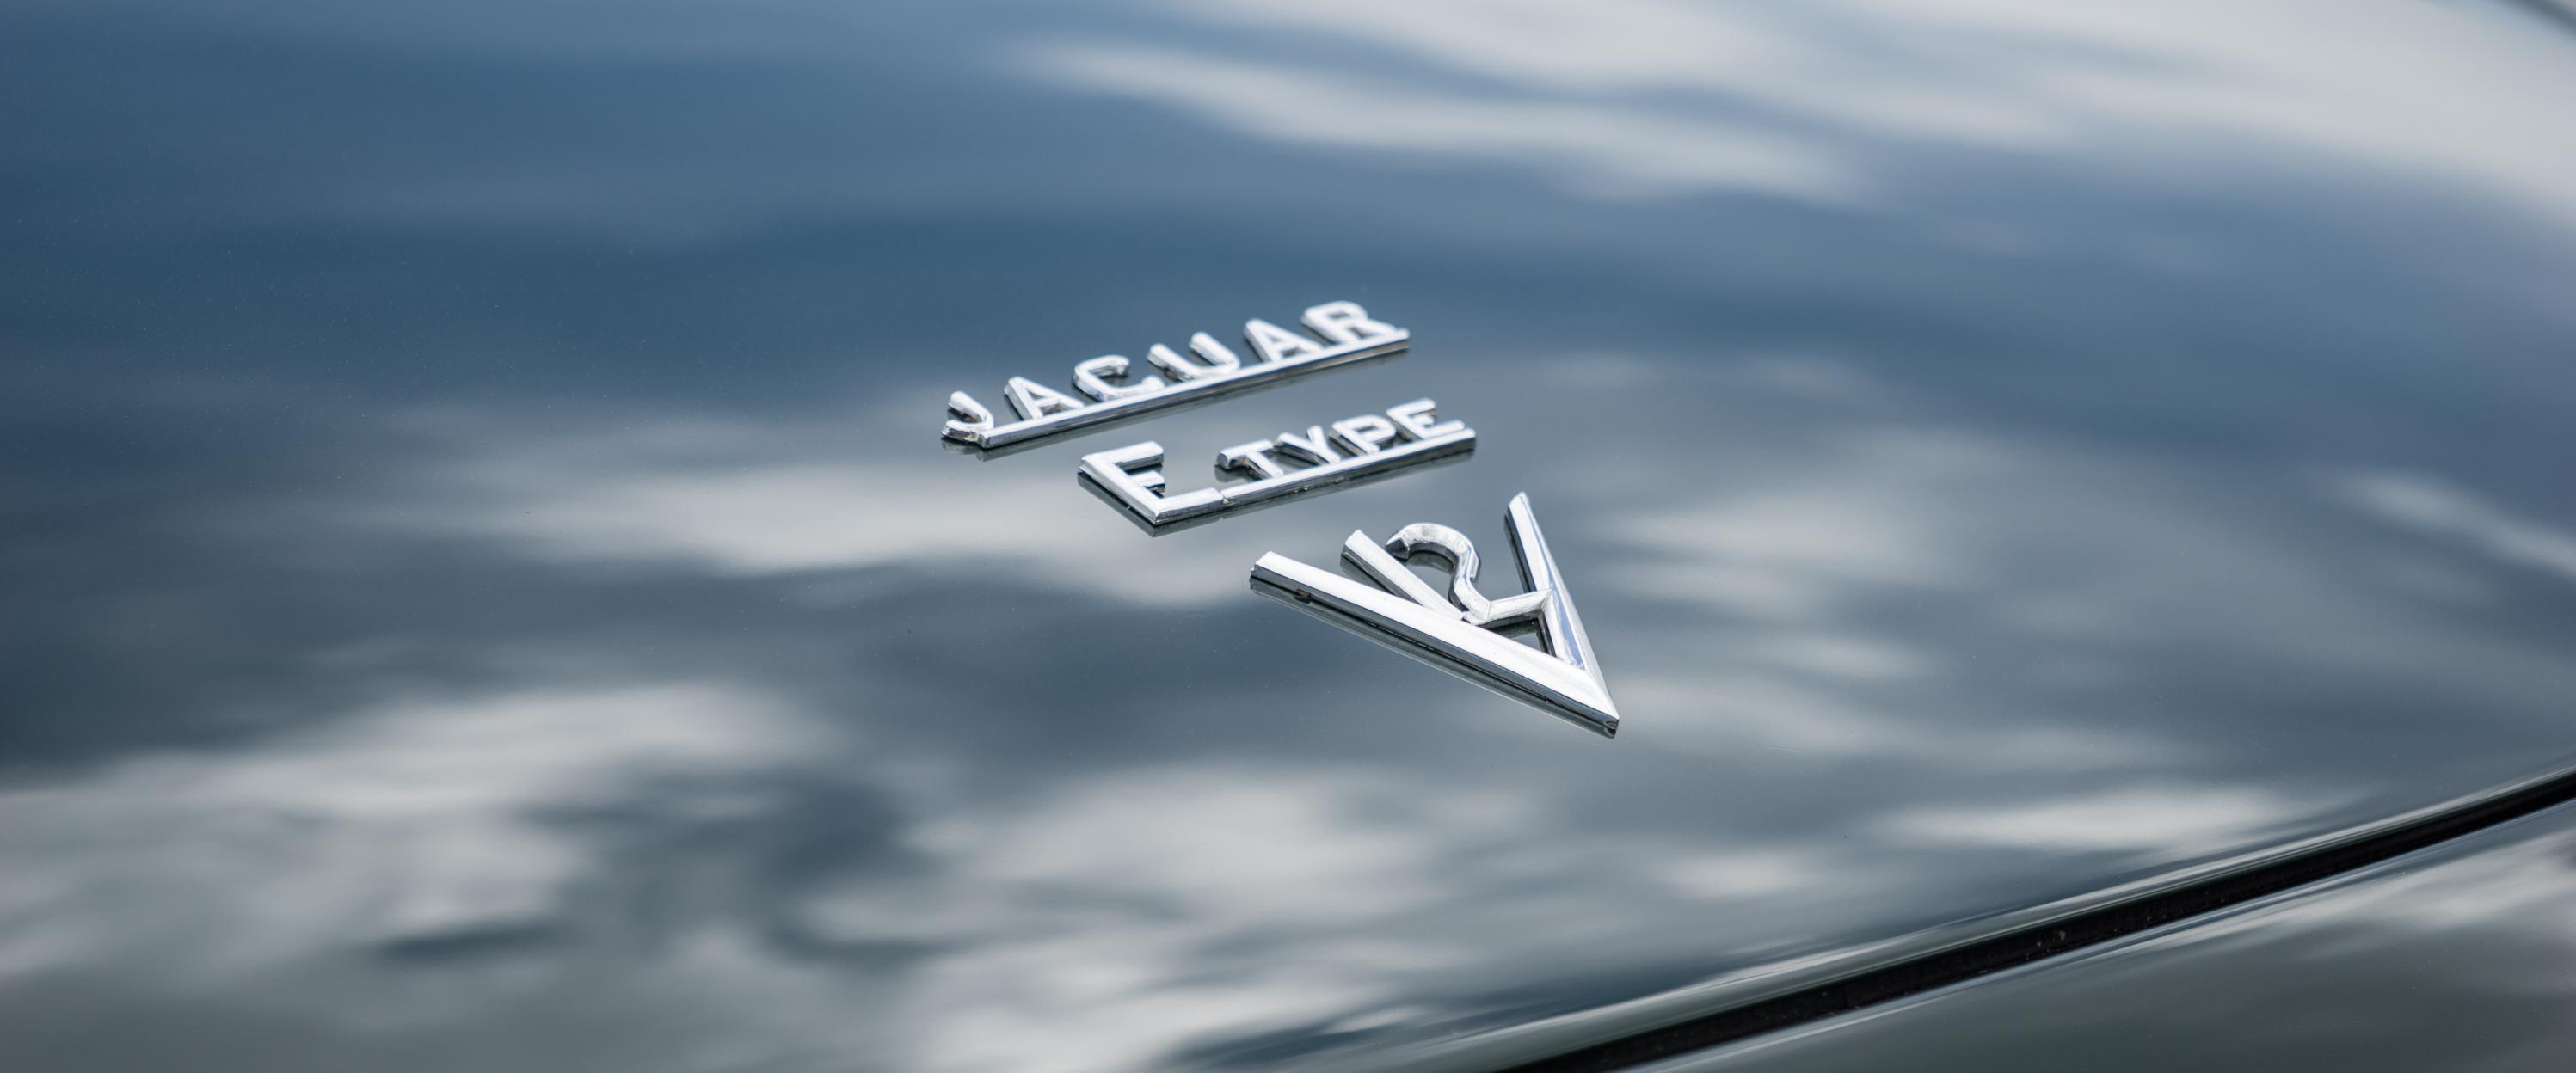 Getting to Know the Jaguar XKE